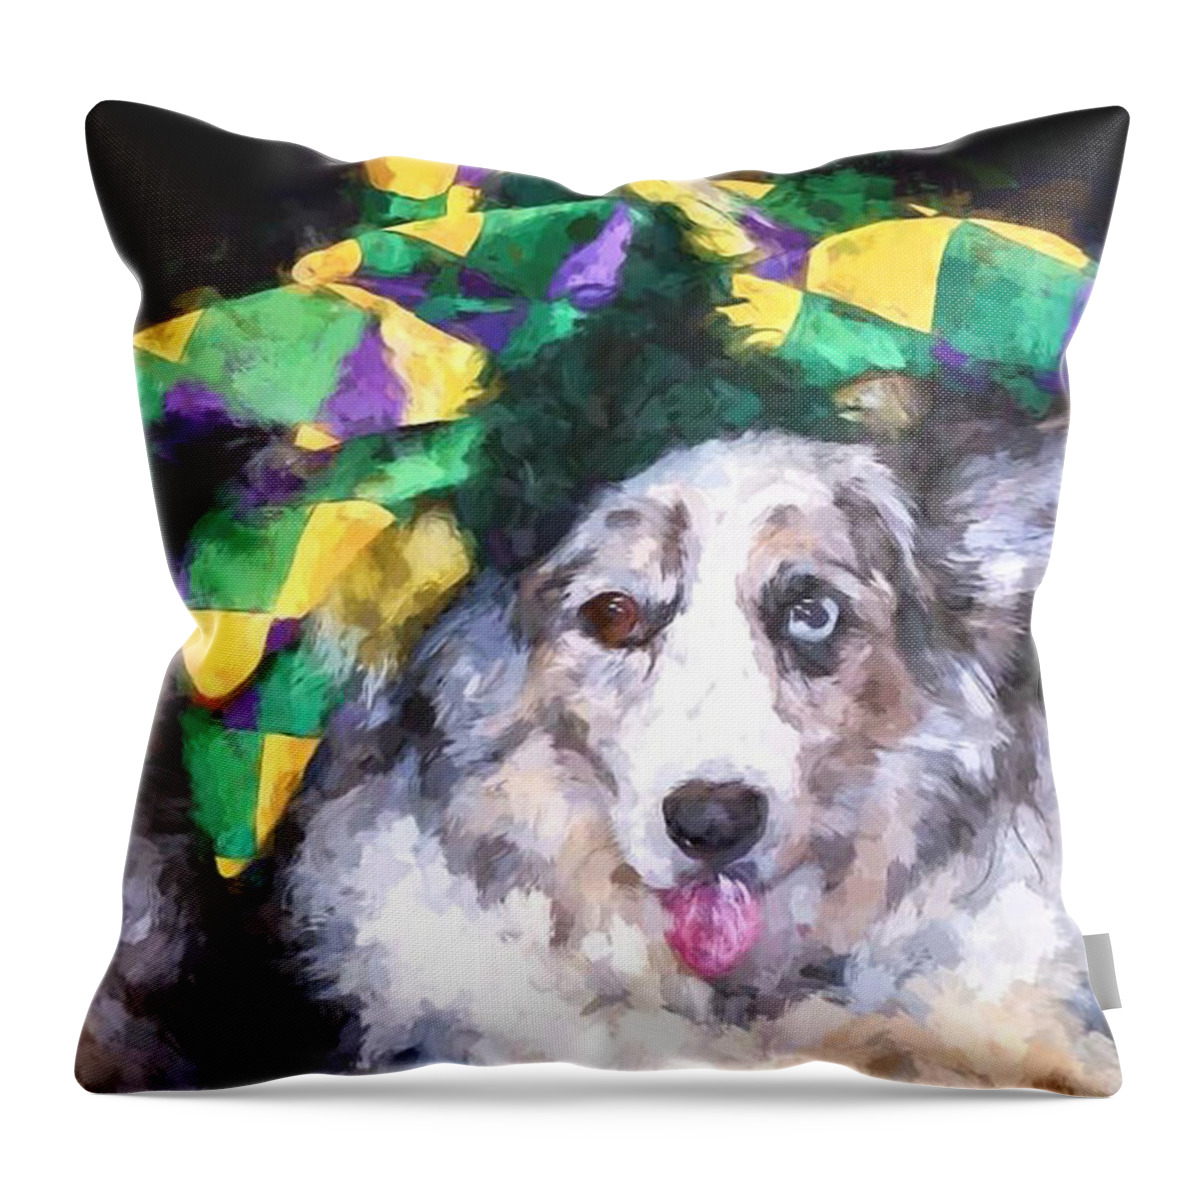 Court Jester Throw Pillow featuring the photograph The Court Jester by Cathy Donohoue